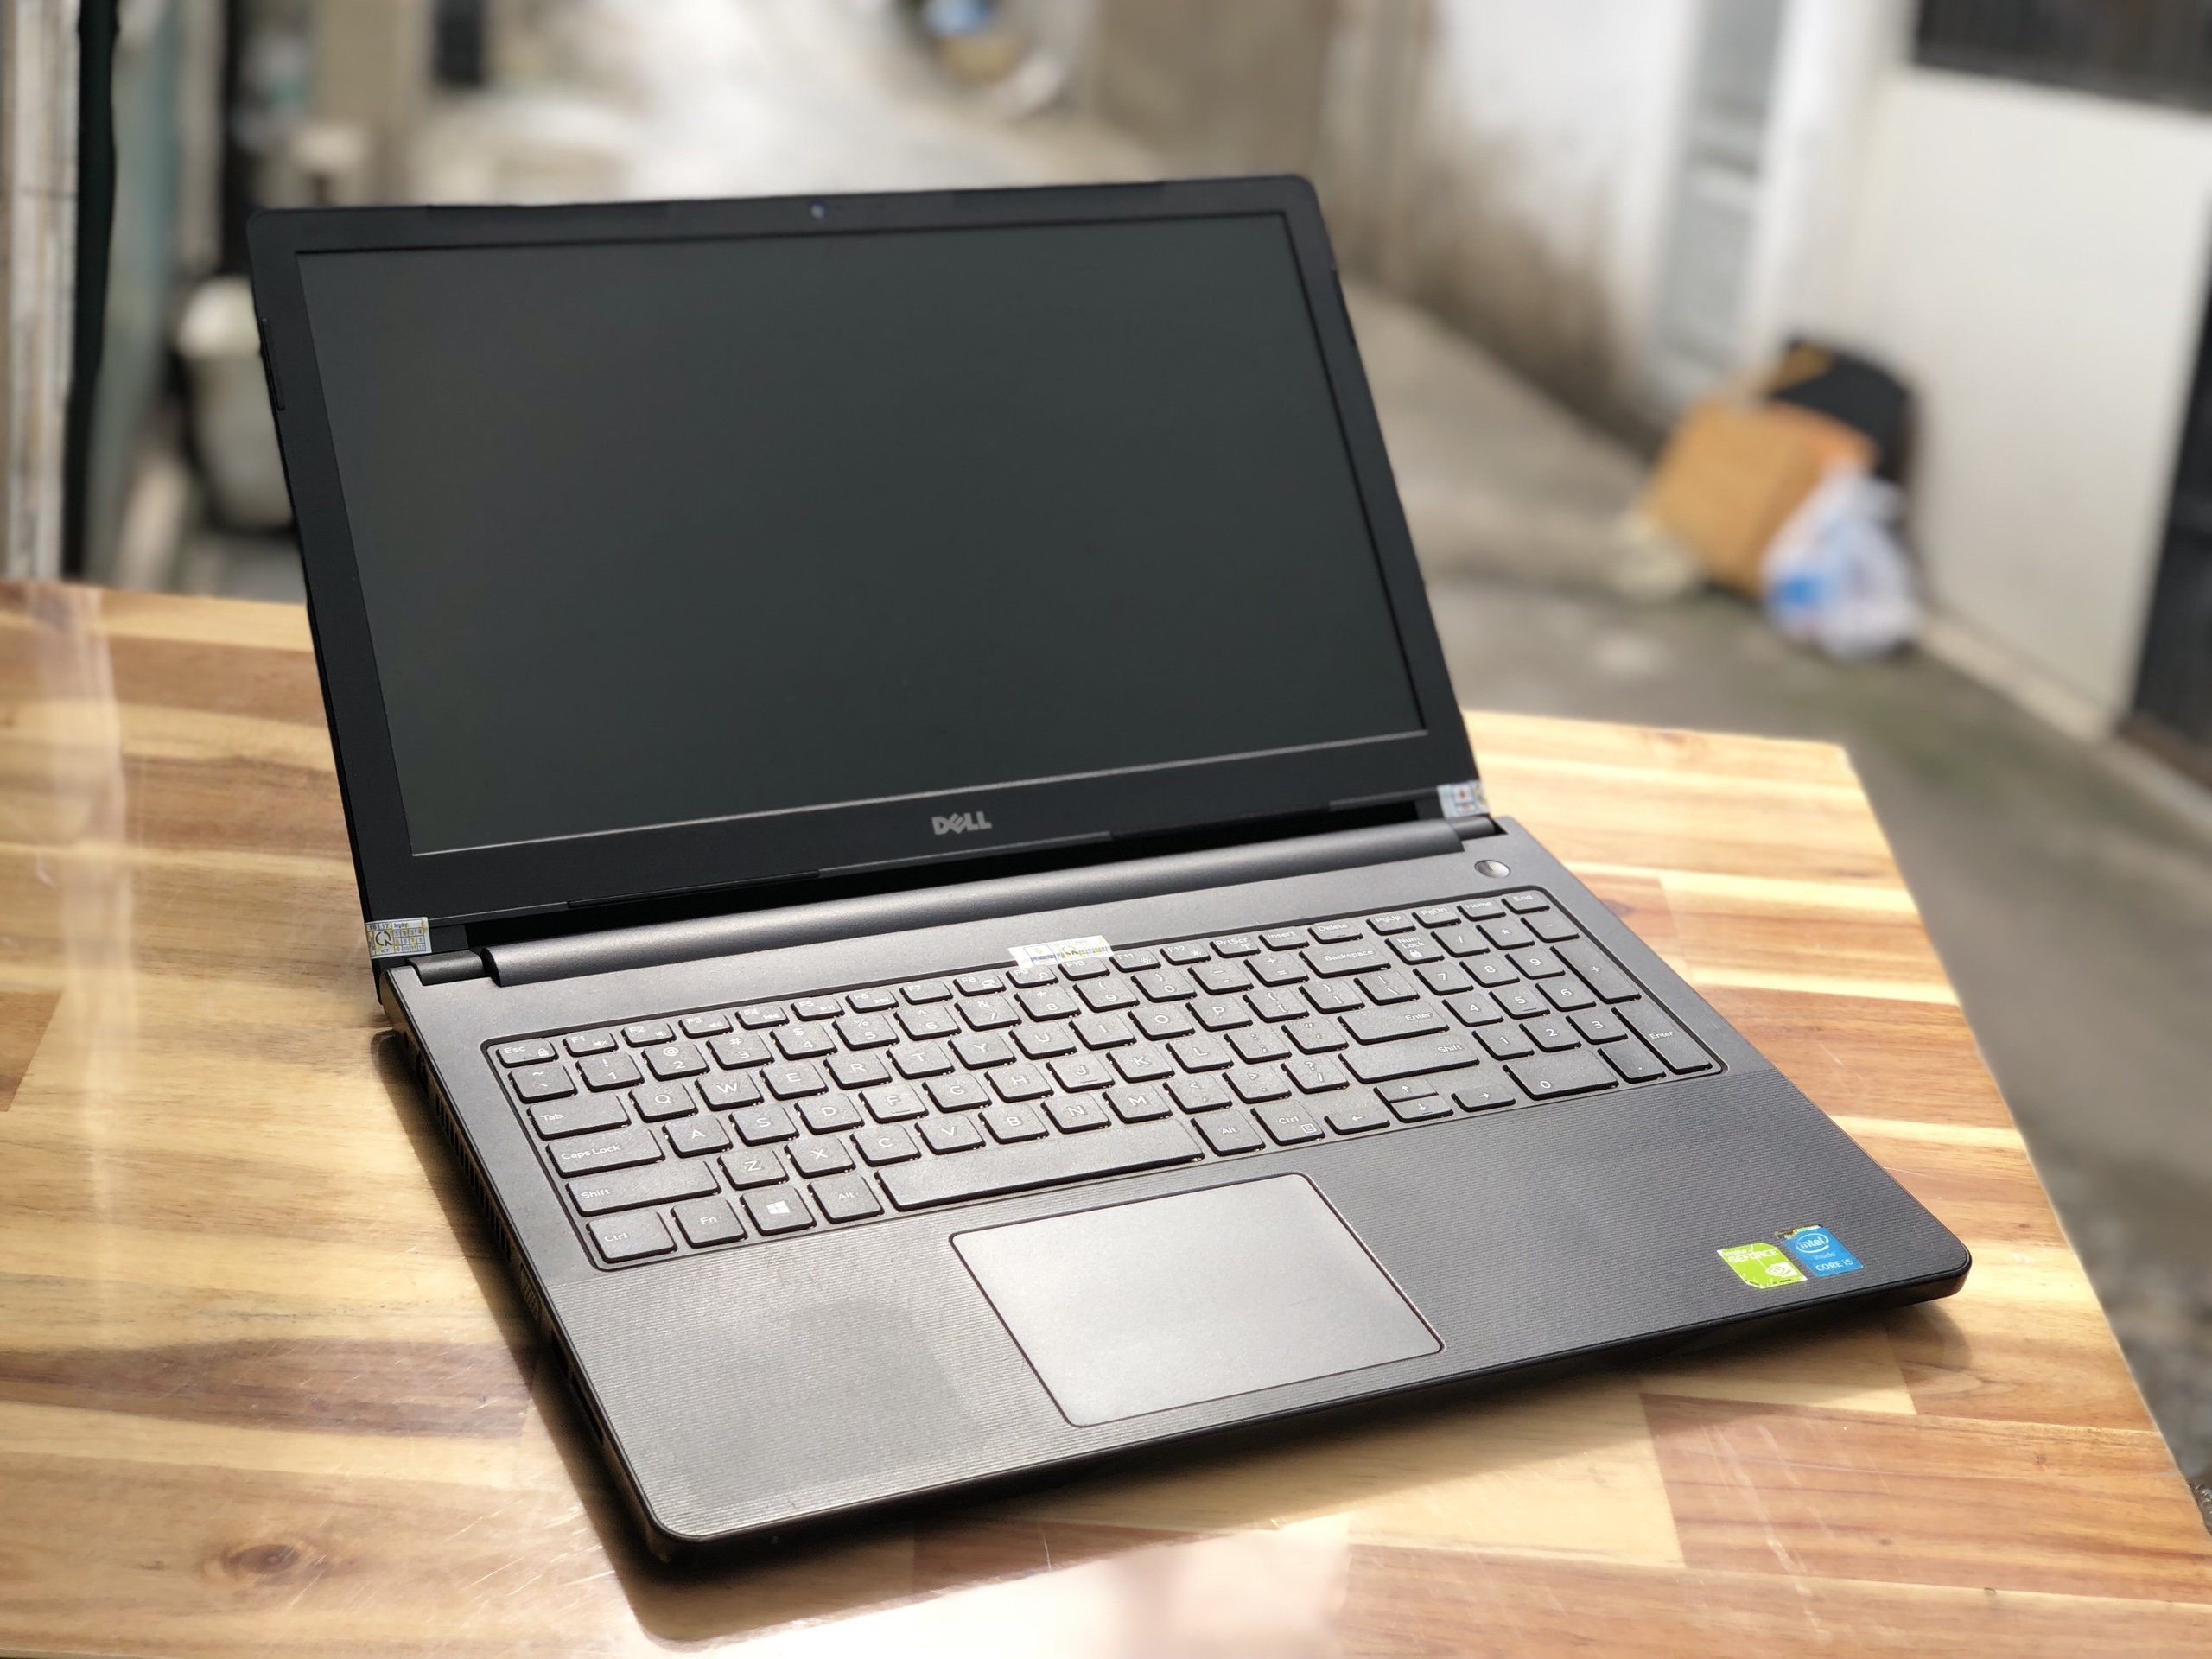 Laptop Dell Vostro 3558/ i5 5250U/ 4G/ SSD128/ 15in/ Win 10/ Giá rẻ1